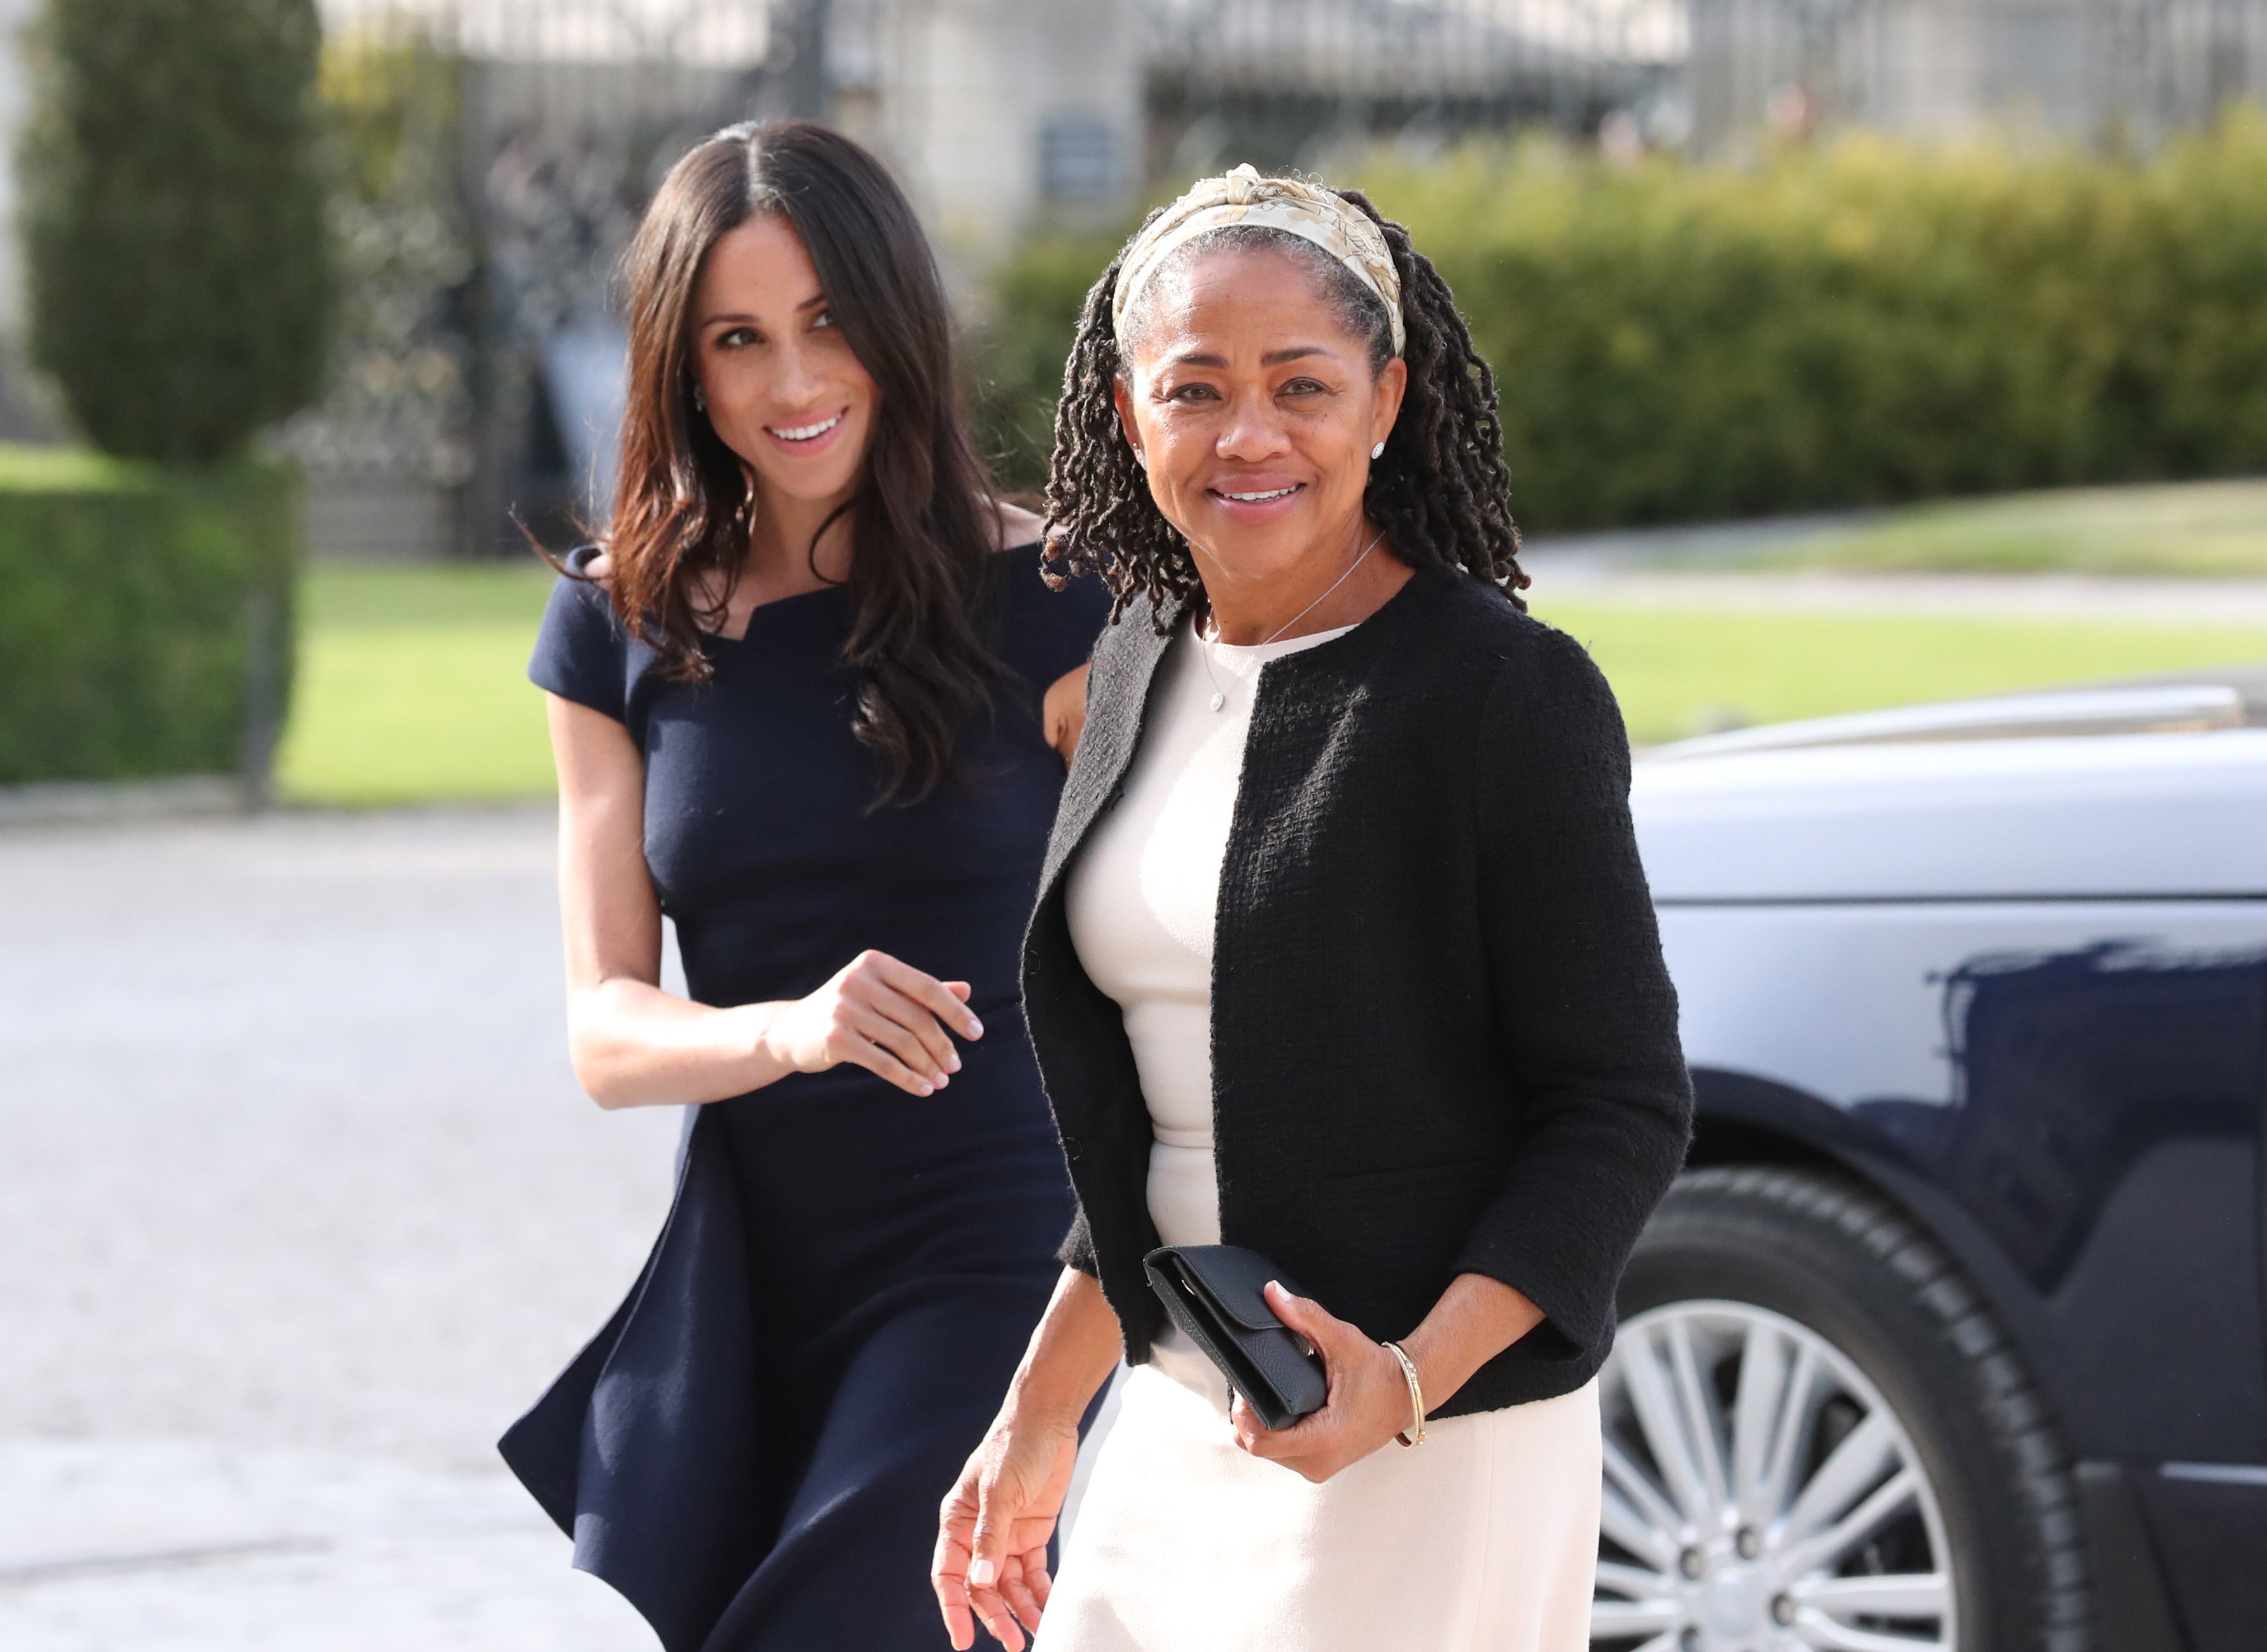 Meghan Markle and her mother, Doria Ragland arrive at Cliveden House Hotel on May 18, 2018 in Berkshire, England. | Source: Getty Images.